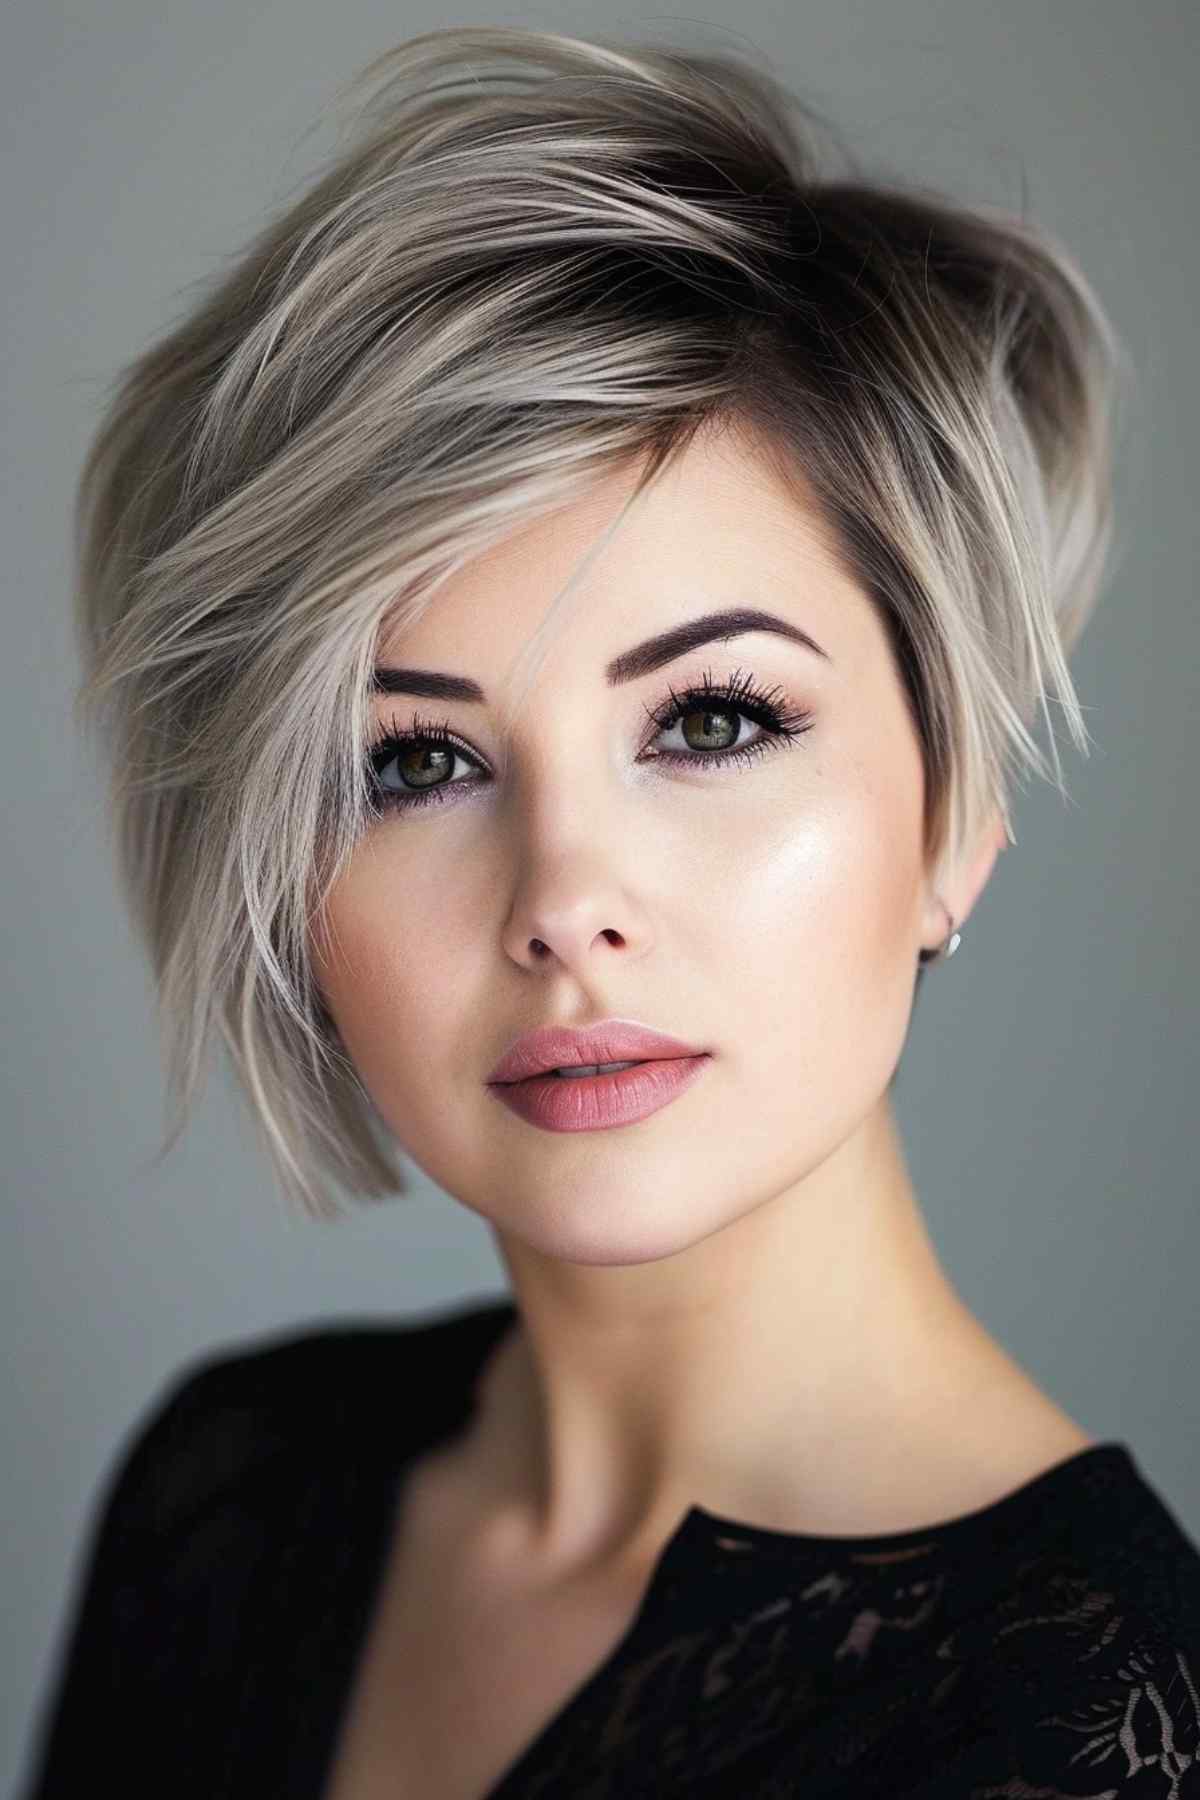 A feisty pixie bob with an edgy side part